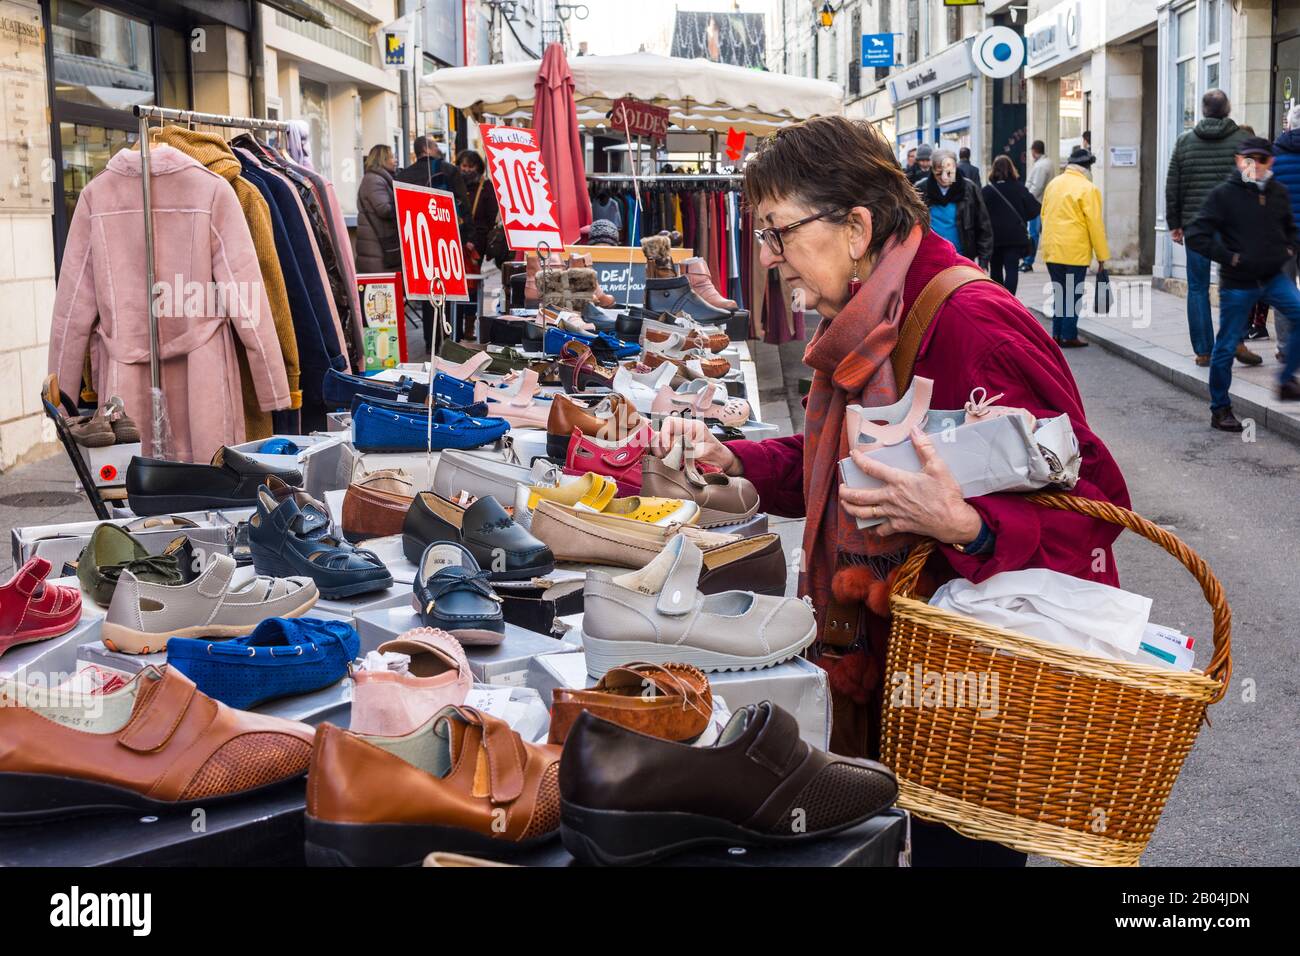 Woman shopping for shoes on open-air market stall, Loches, Indre-et-Loire, France. Stock Photo